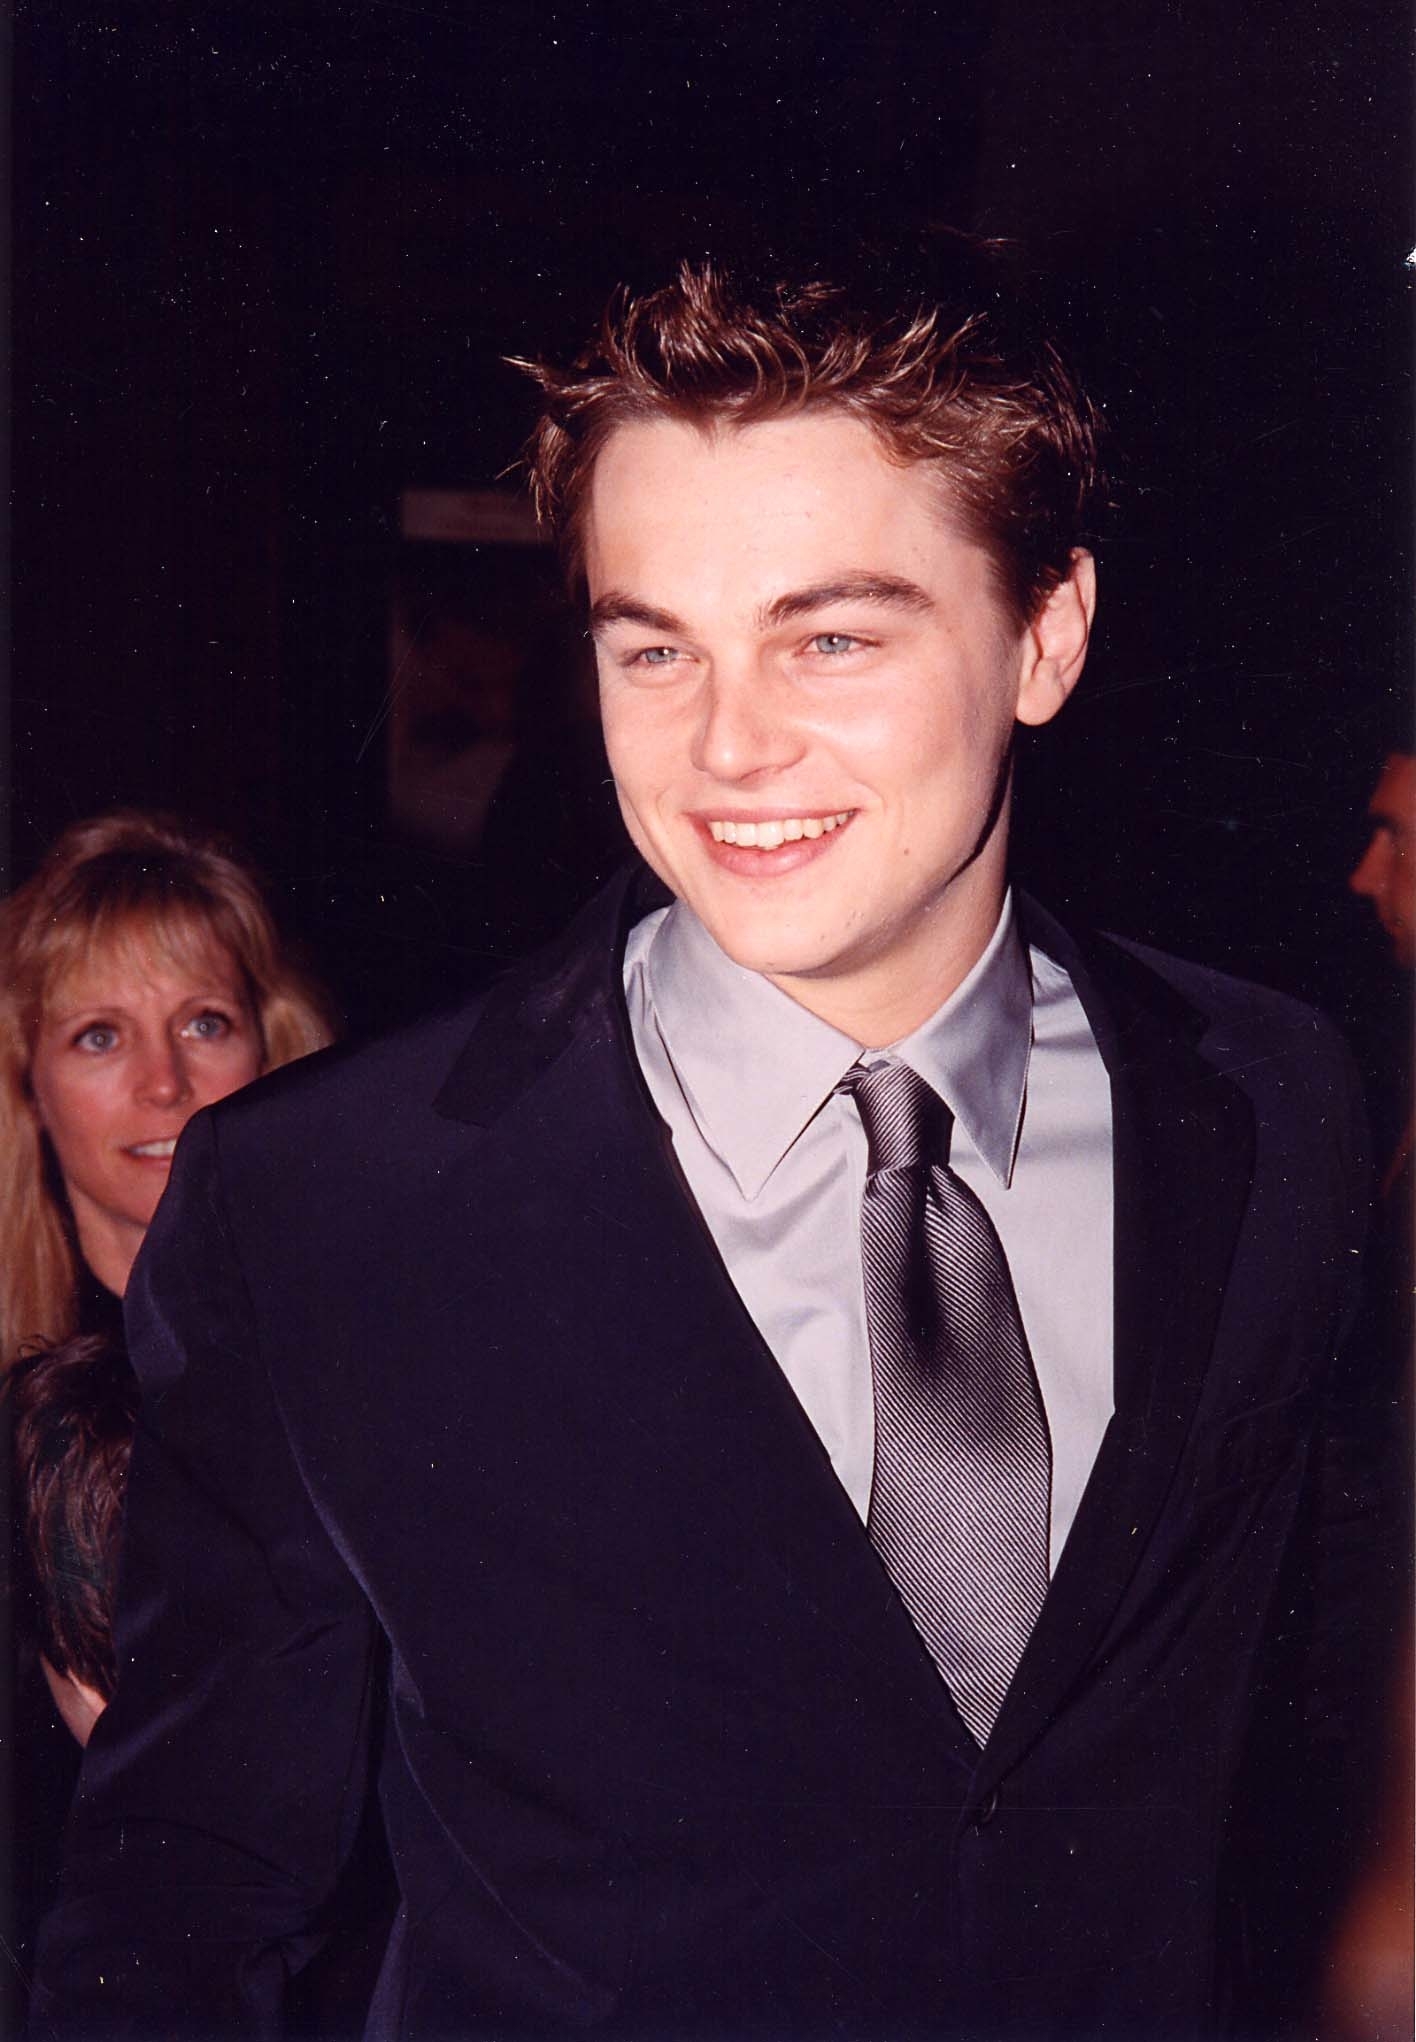 A younger Leo on the red carpet